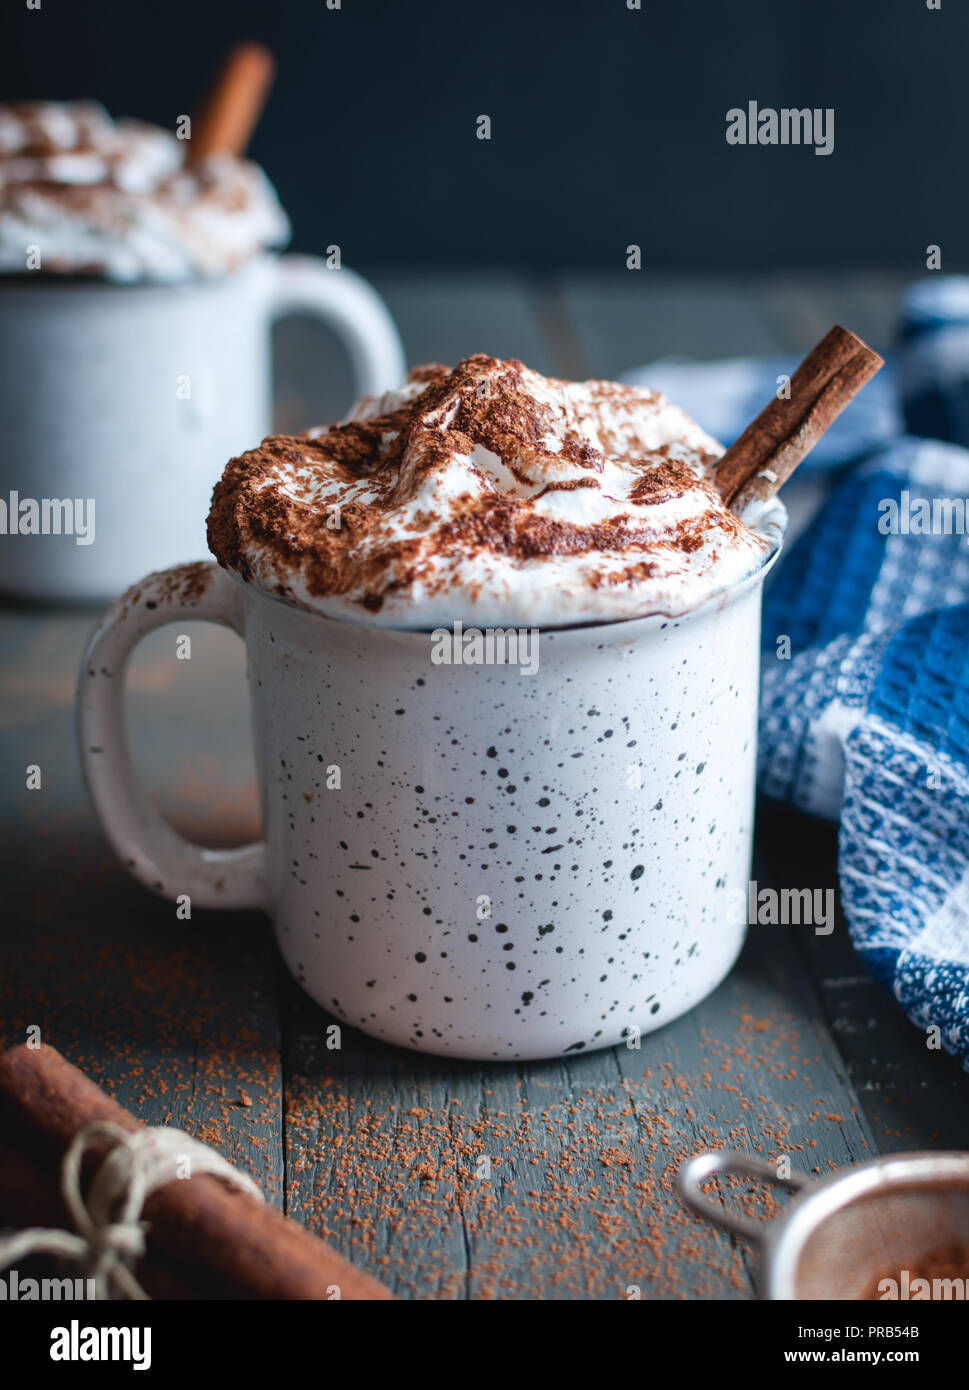 Hot cocoa with whipped cream and cinnamon stick on dark background Stock Photo